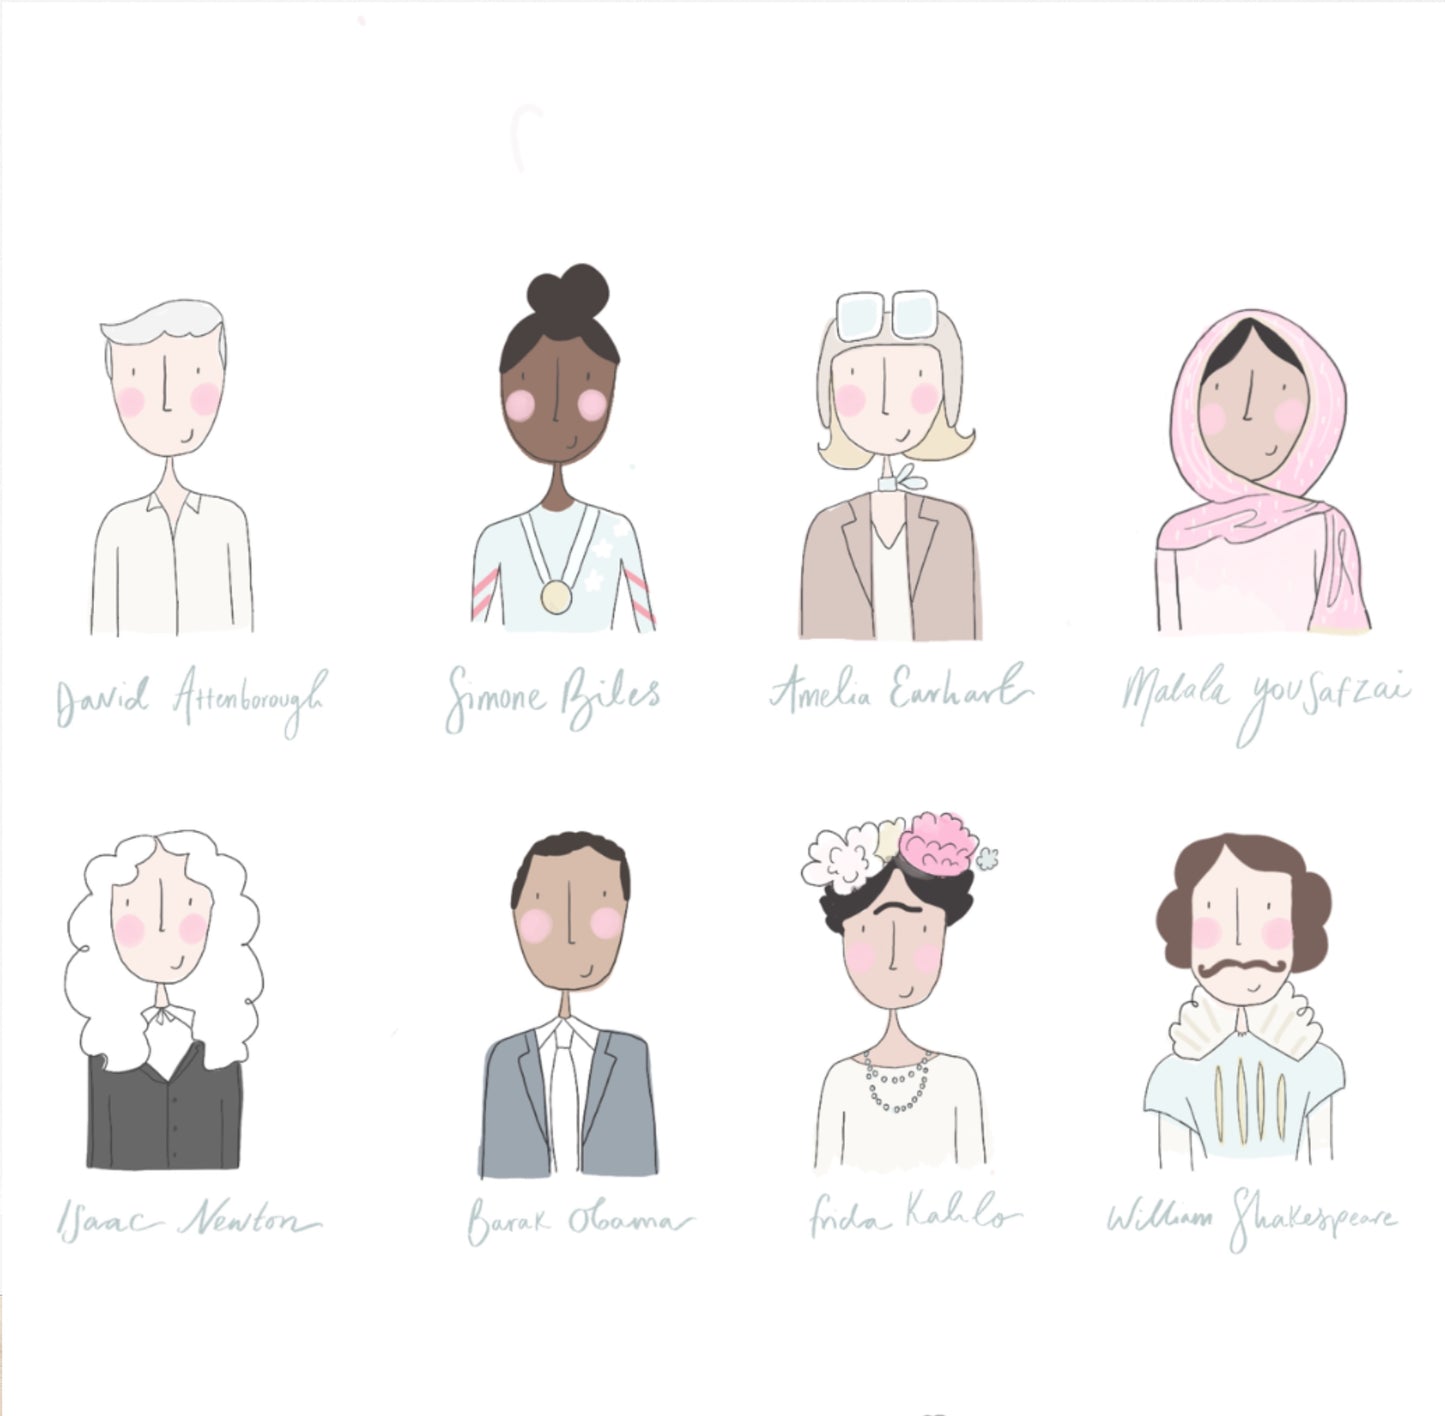 Inspiring people who changed the world illustrated print dreamers